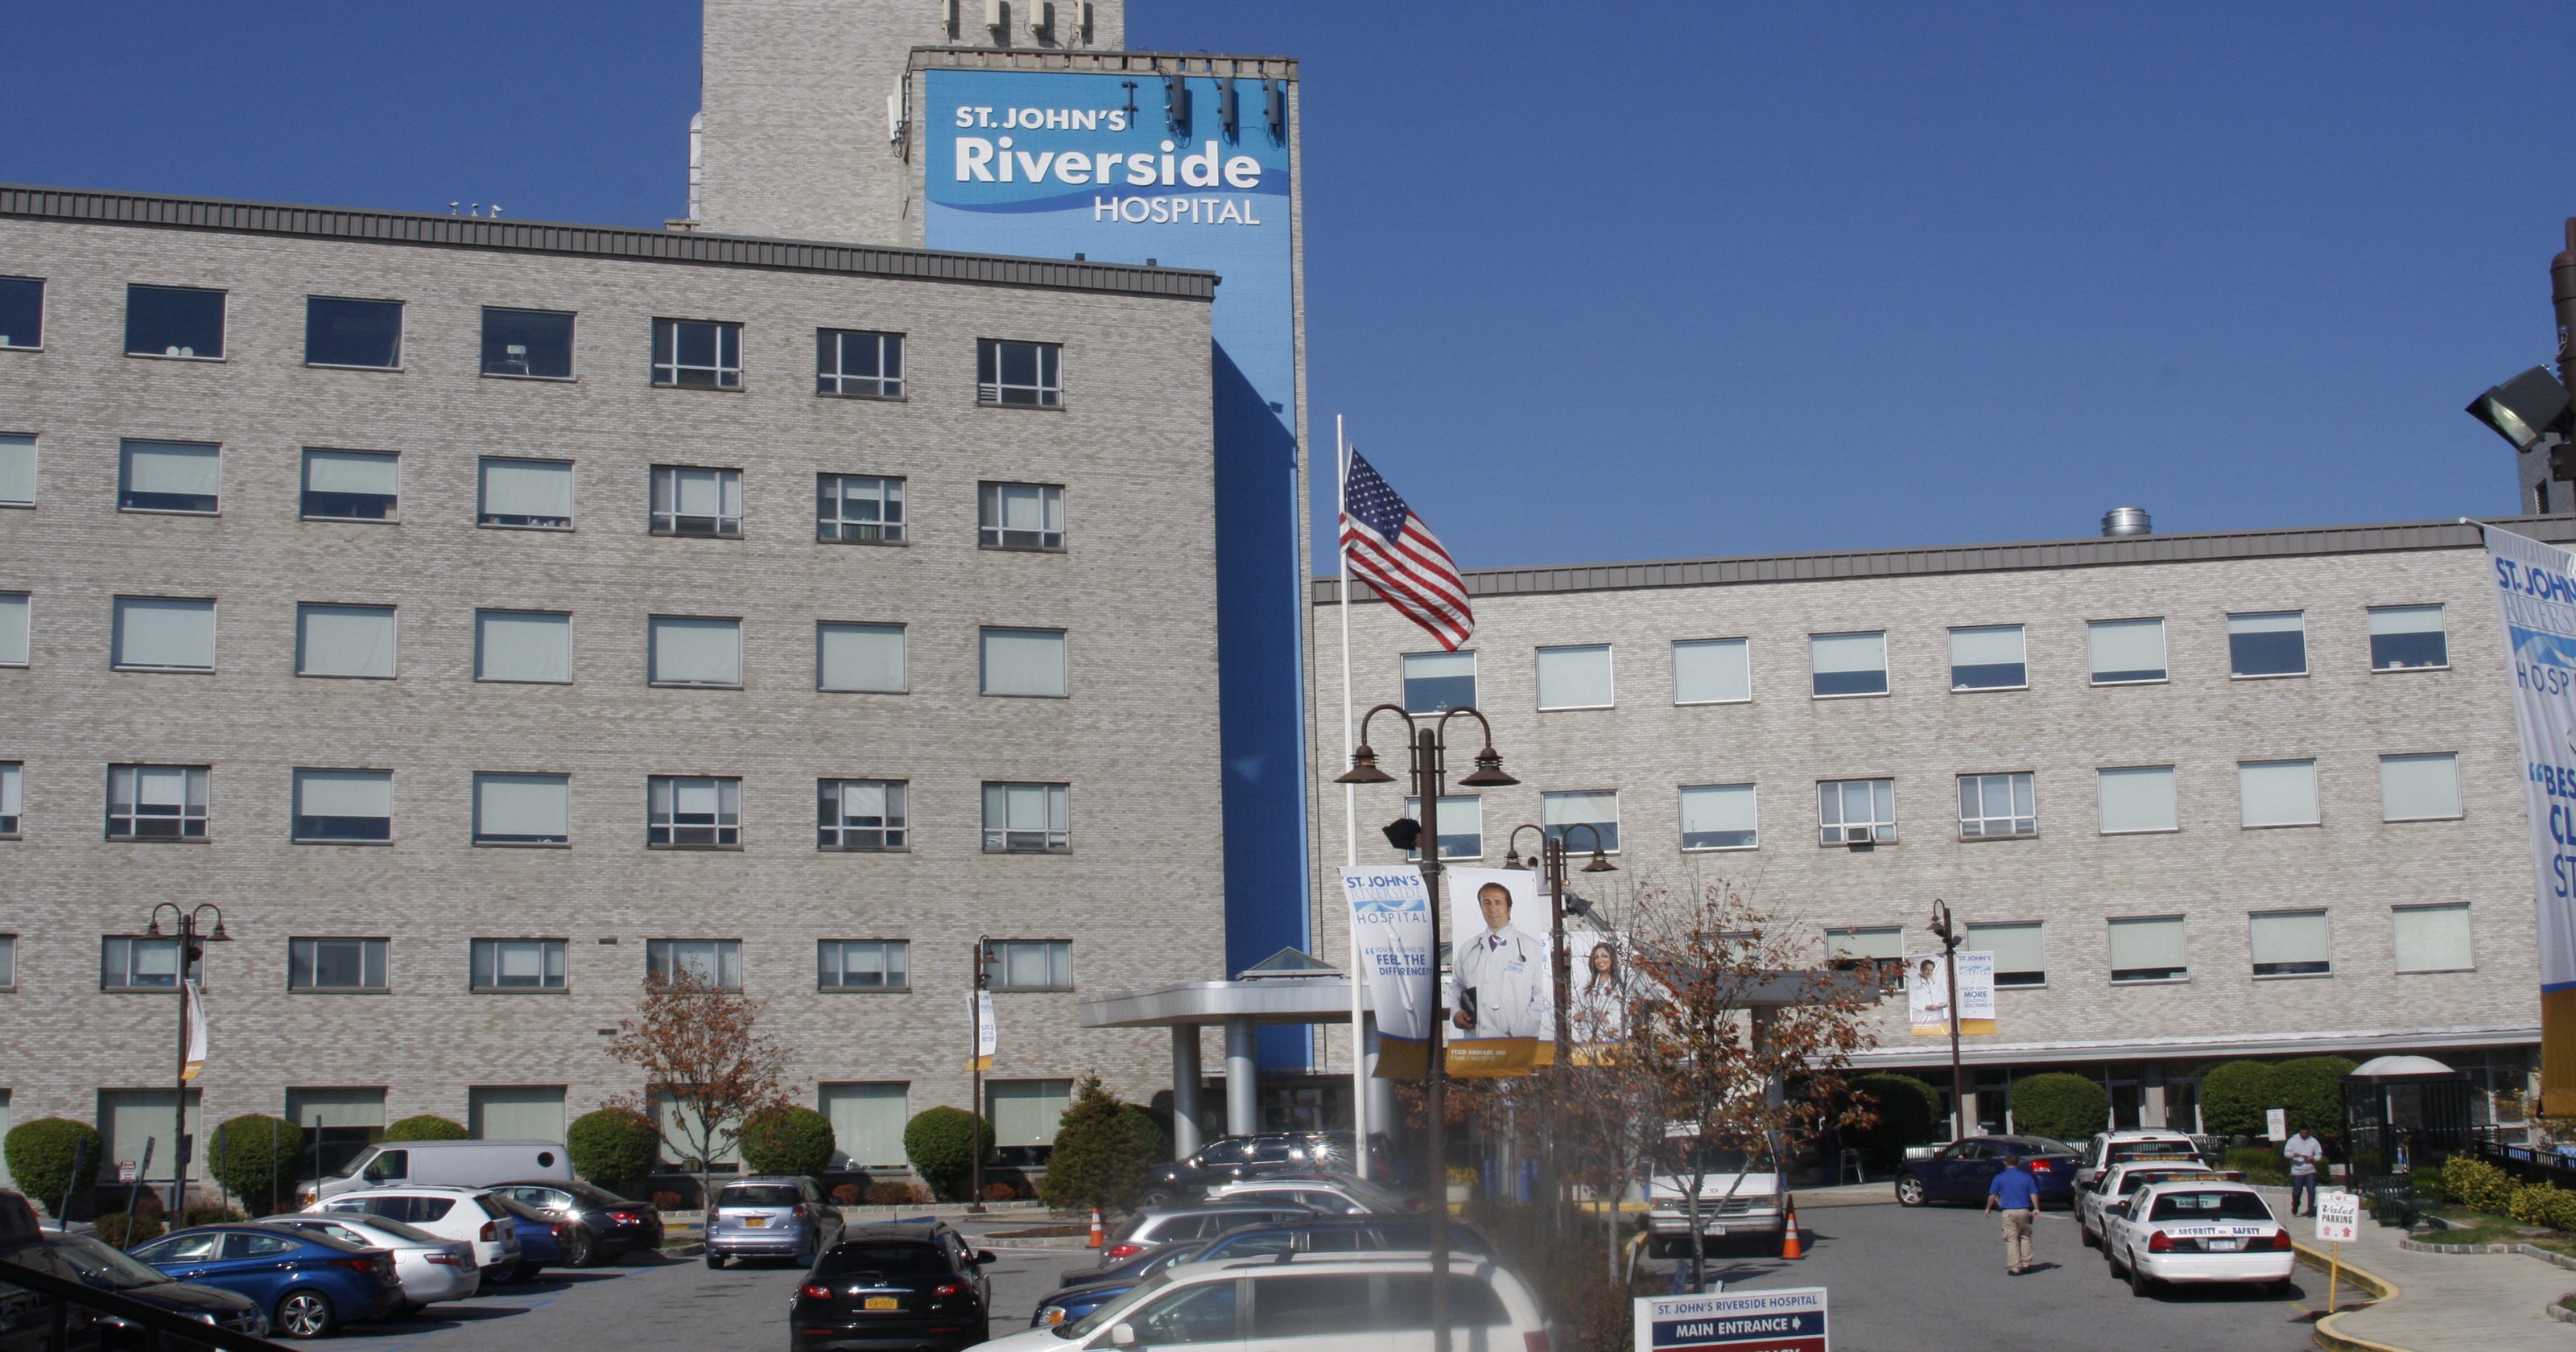 St Johns Riverside Hospital In Yonkers Chases Partnership As Fiscal